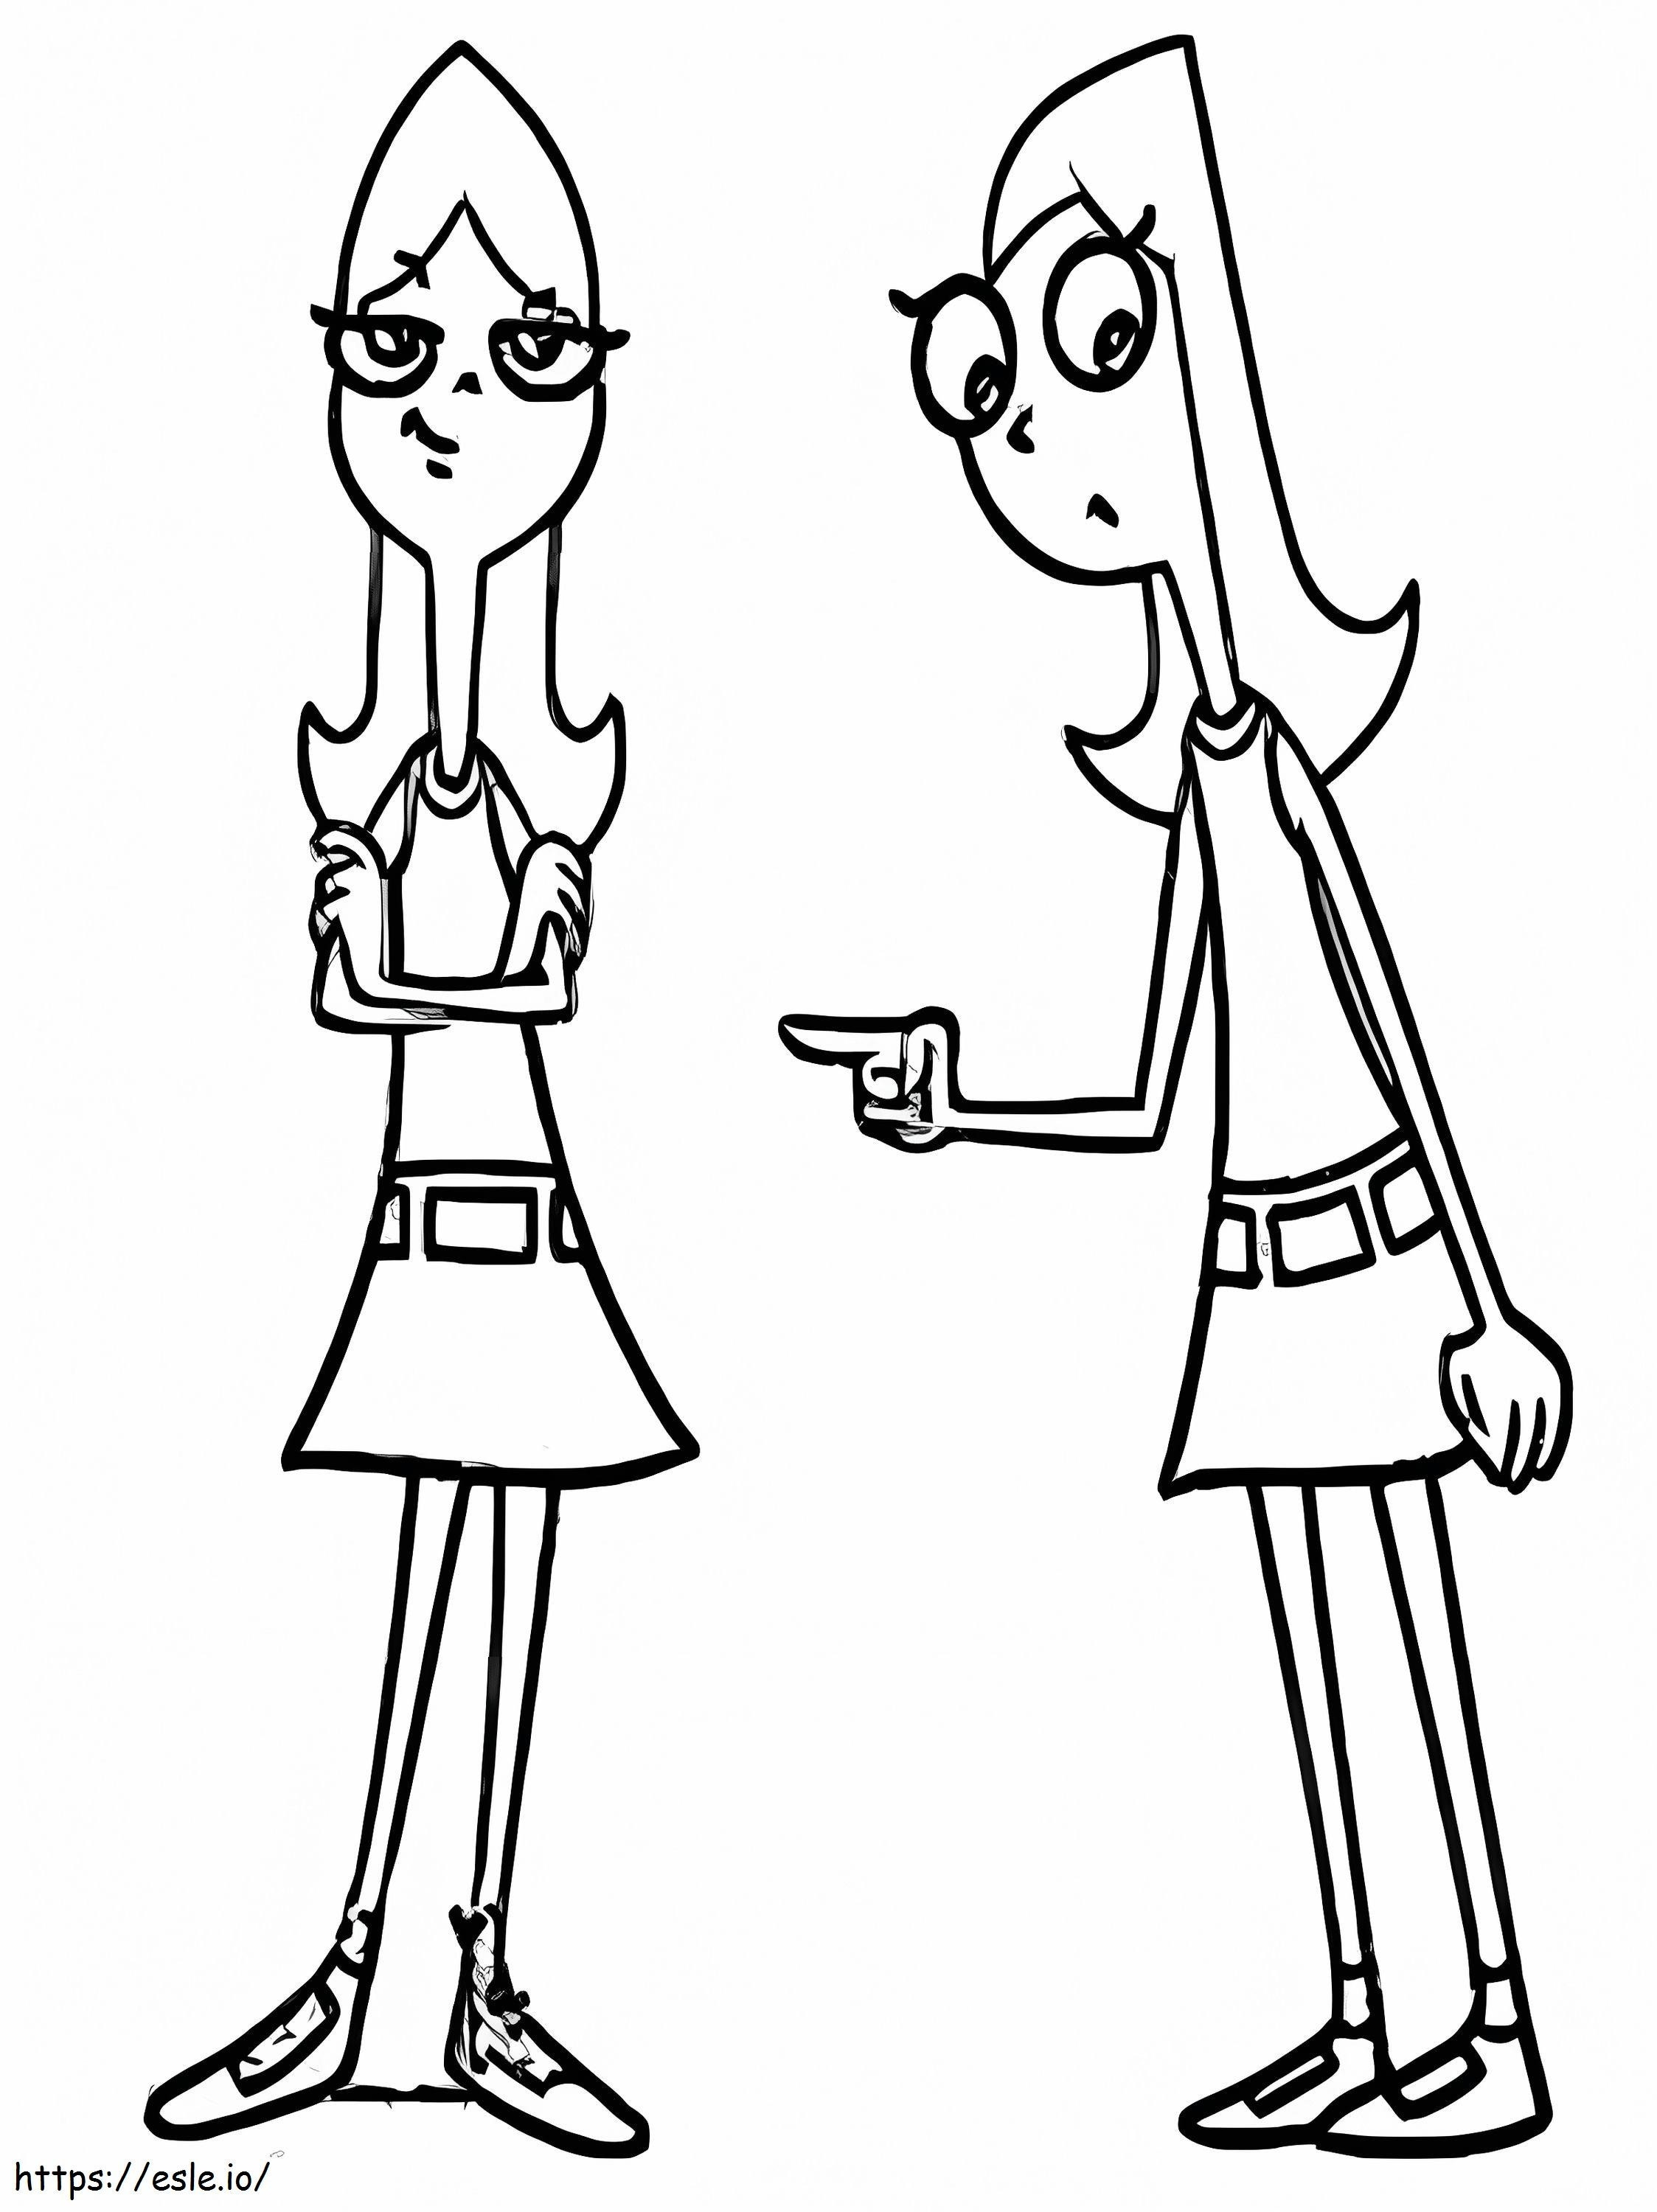 Candace Flynn De Phineas Y Ferb coloring page